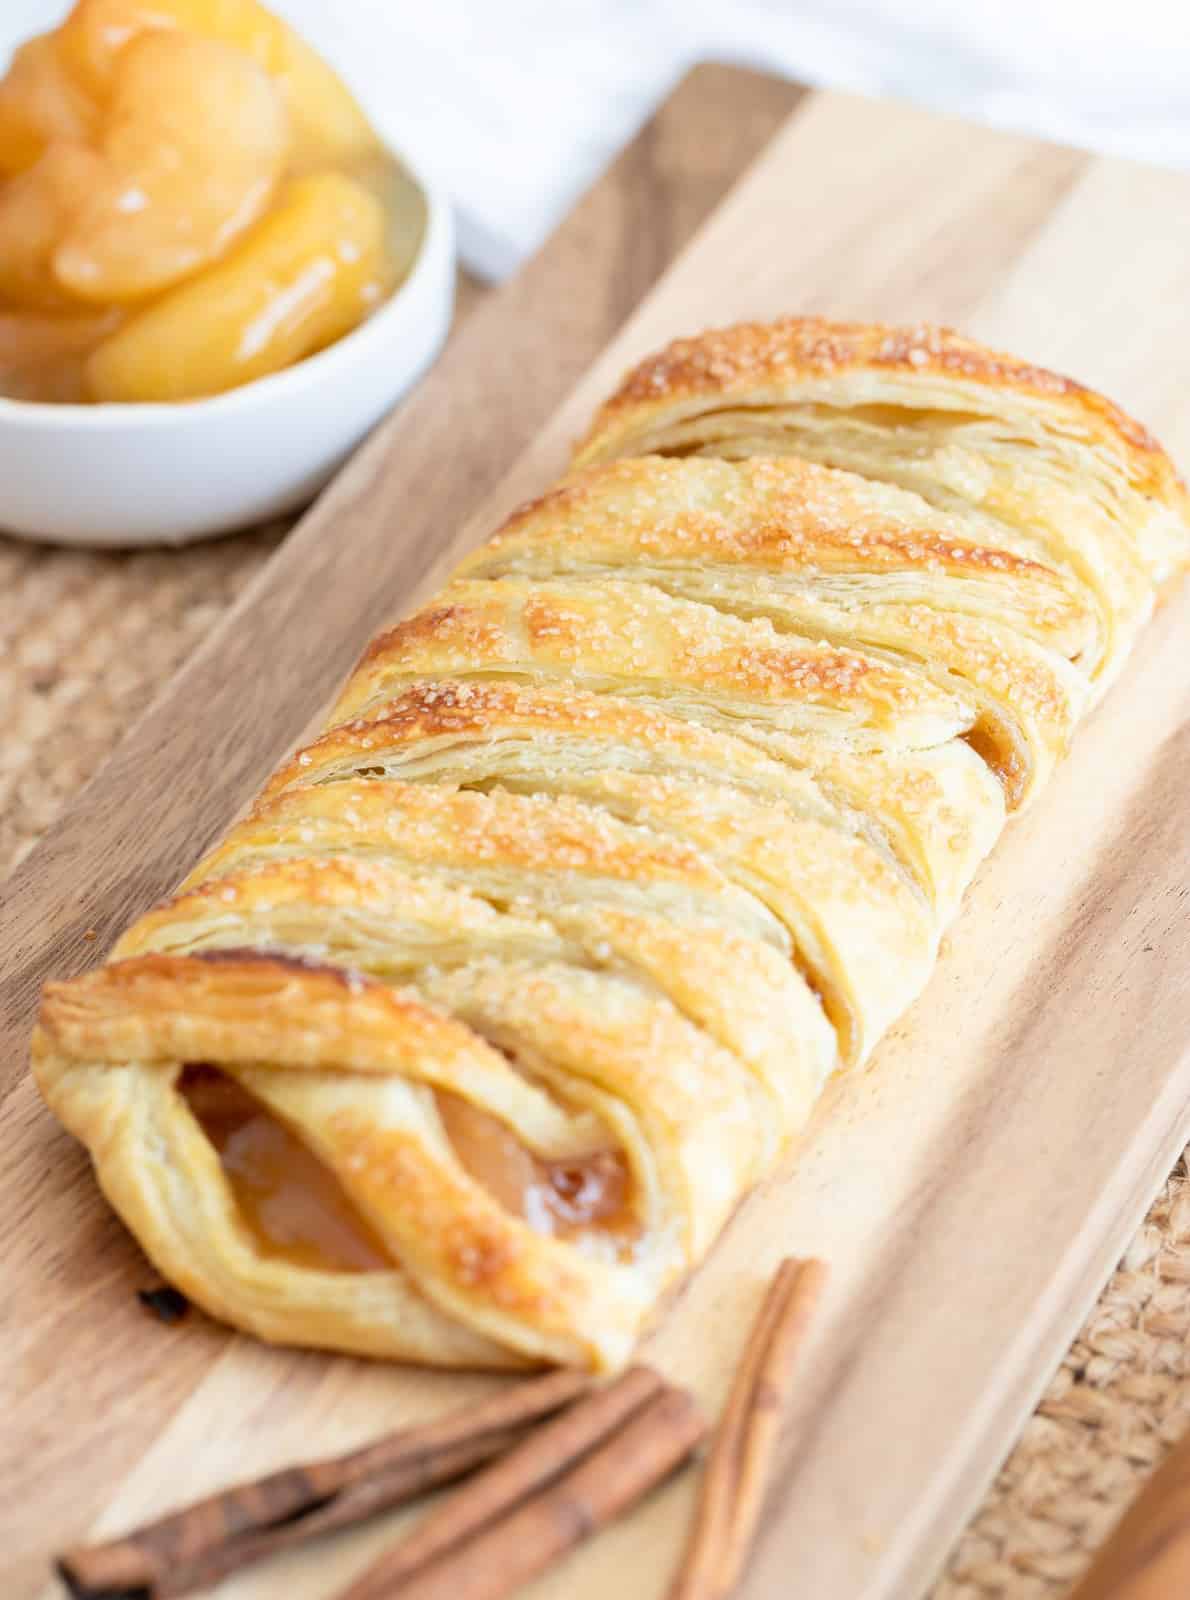 Finished Braided Apple Puff Pastry on cutting board